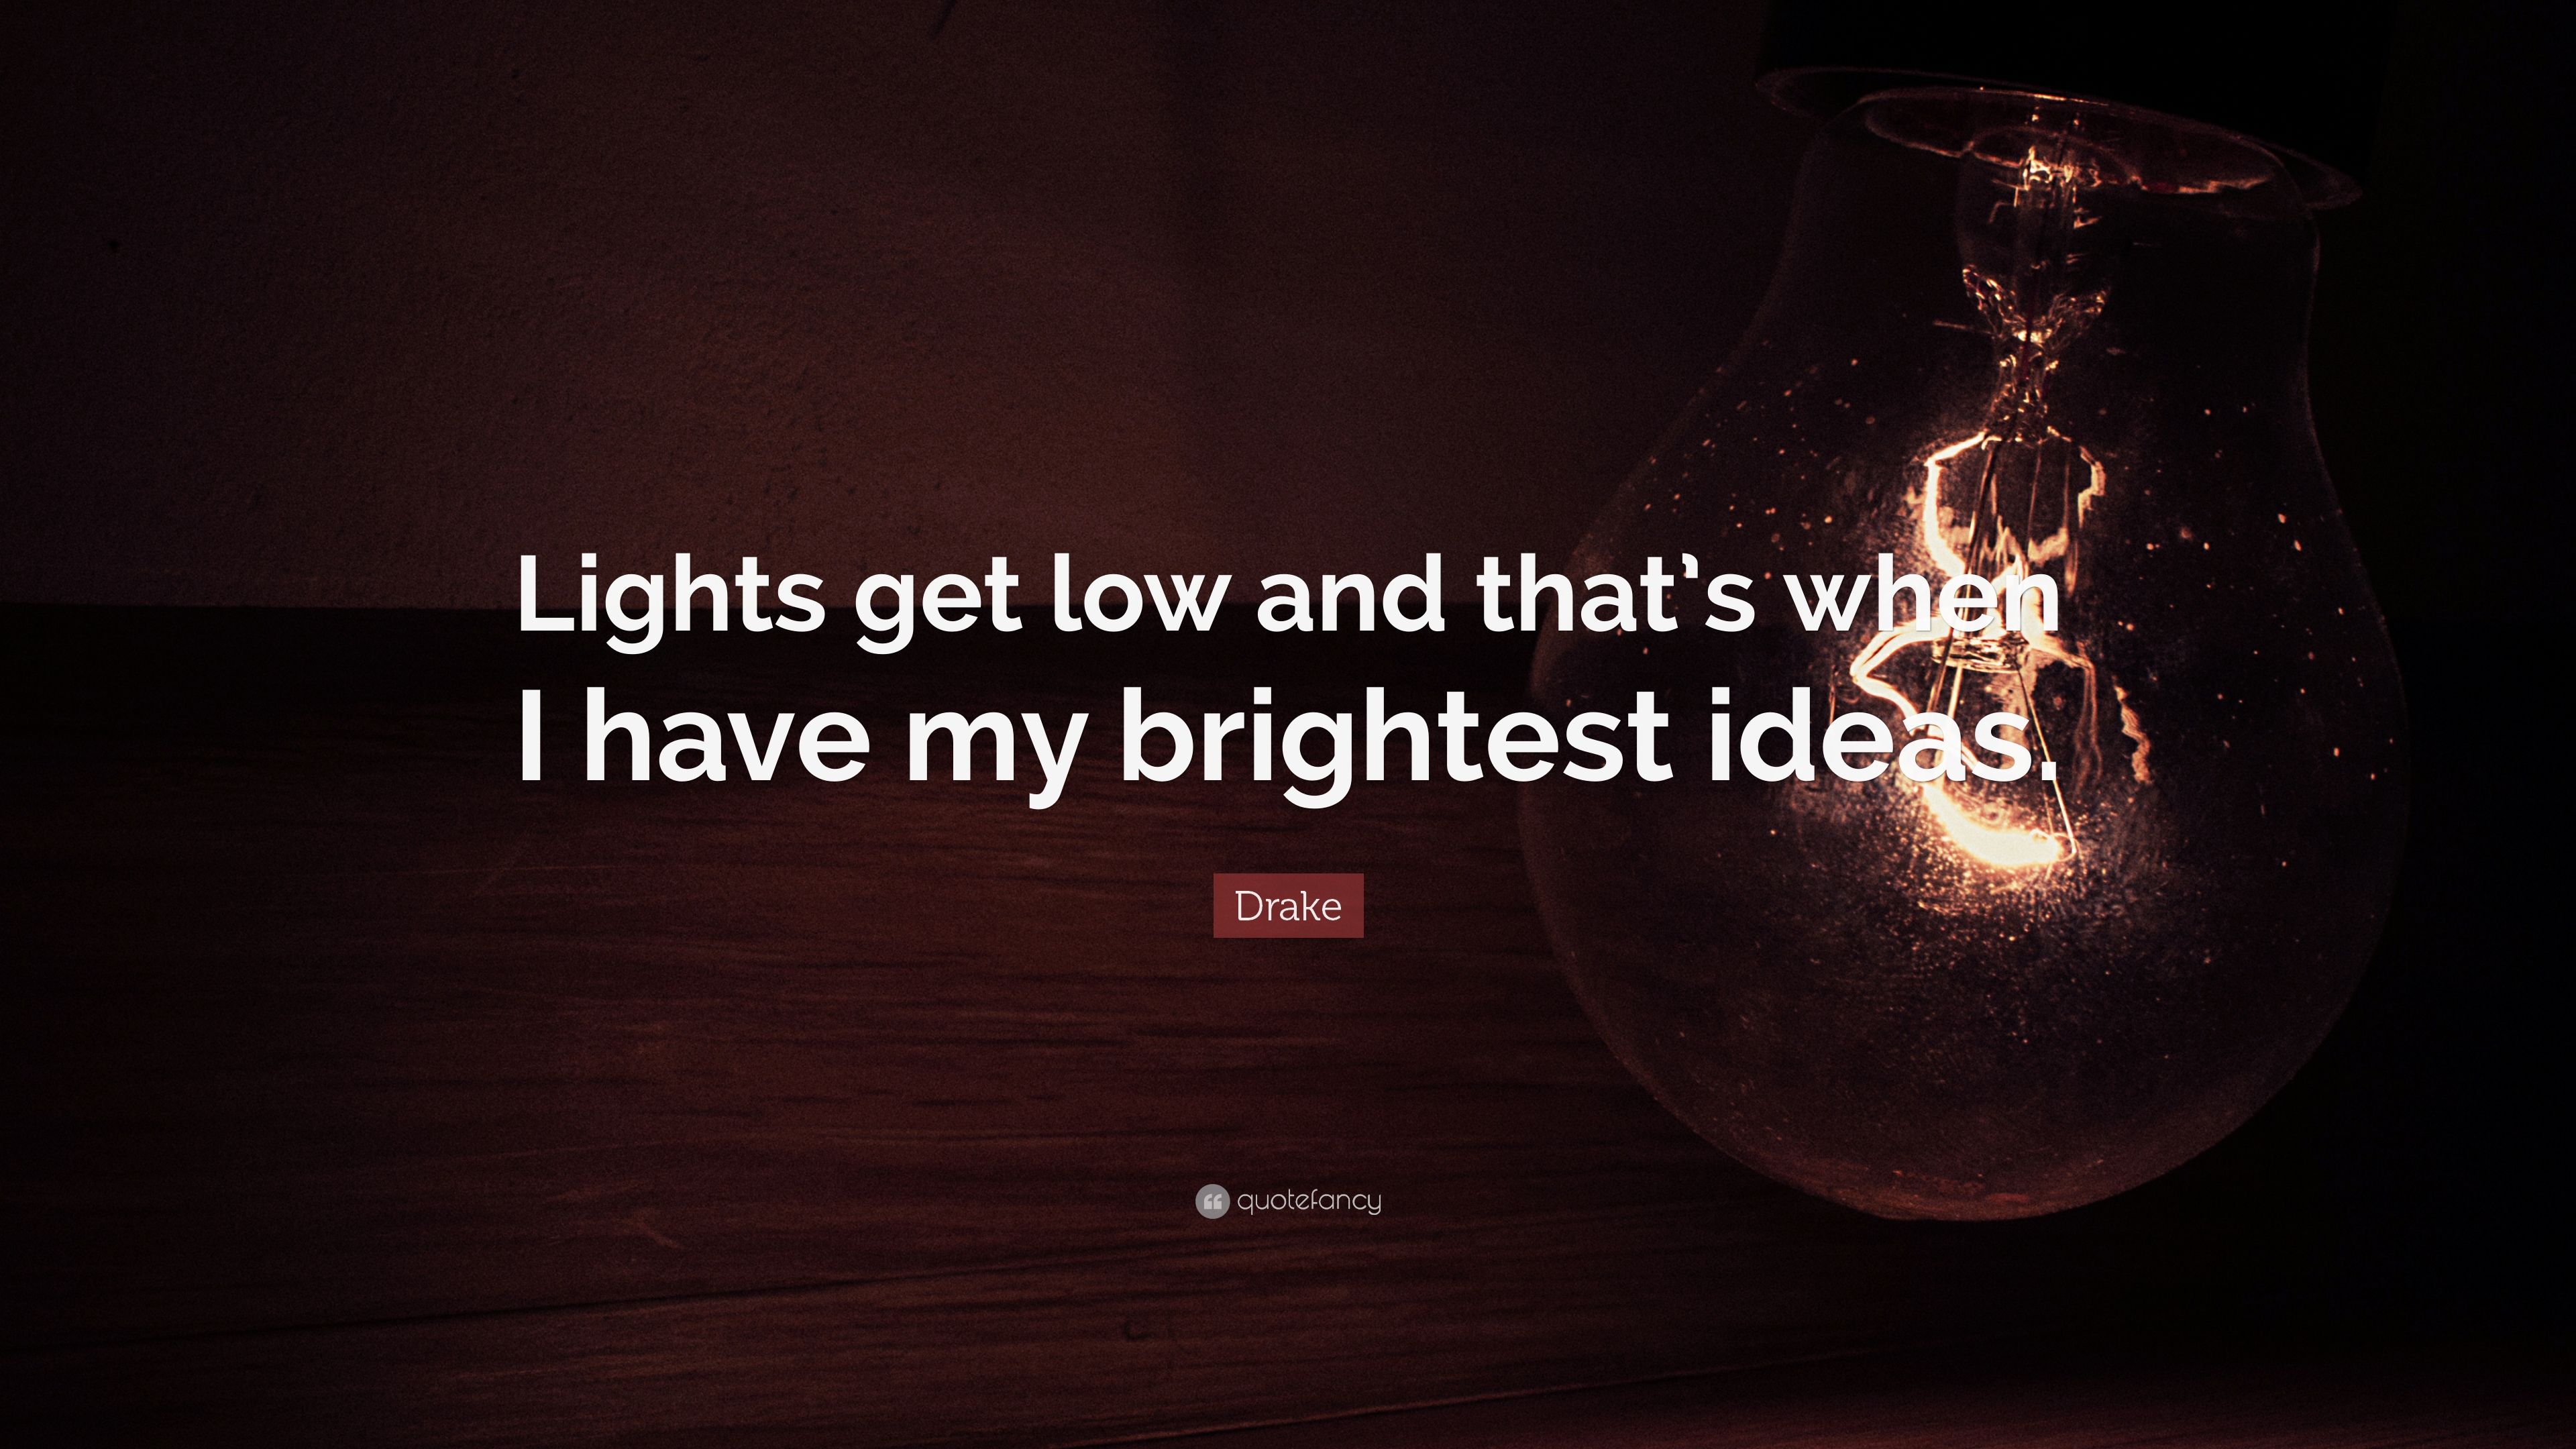 Drake Quote: “Lights get low and that's when I have my brightest ideas.” (14 wallpaper)